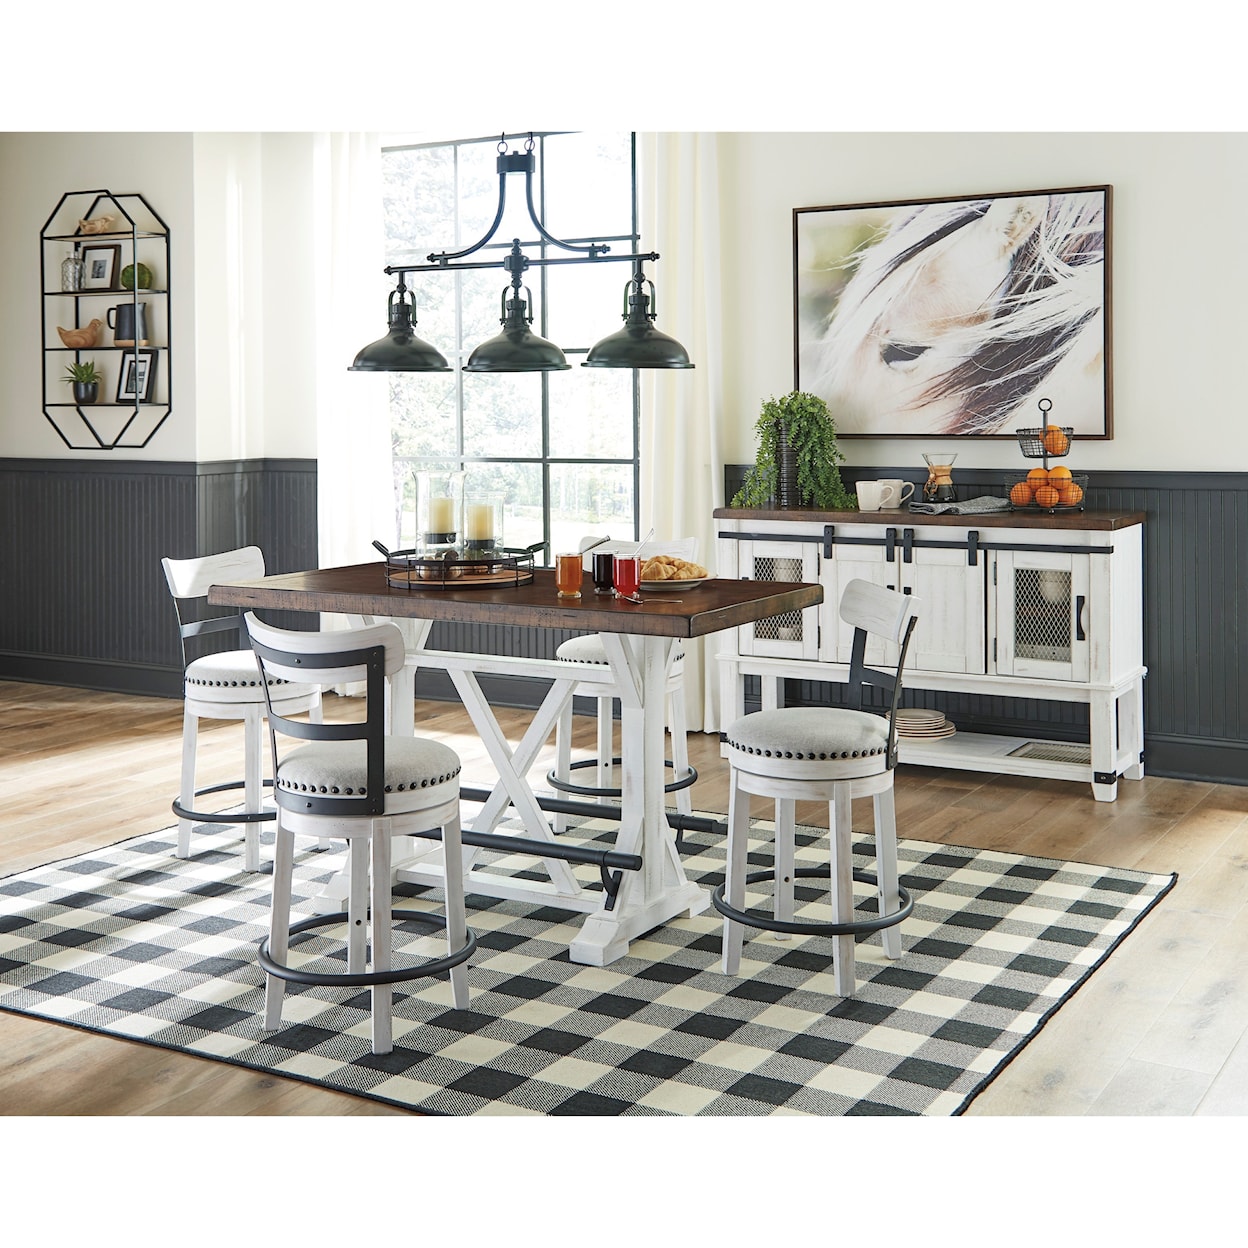 Signature Design by Ashley Valebeck Casual Dining Room Group